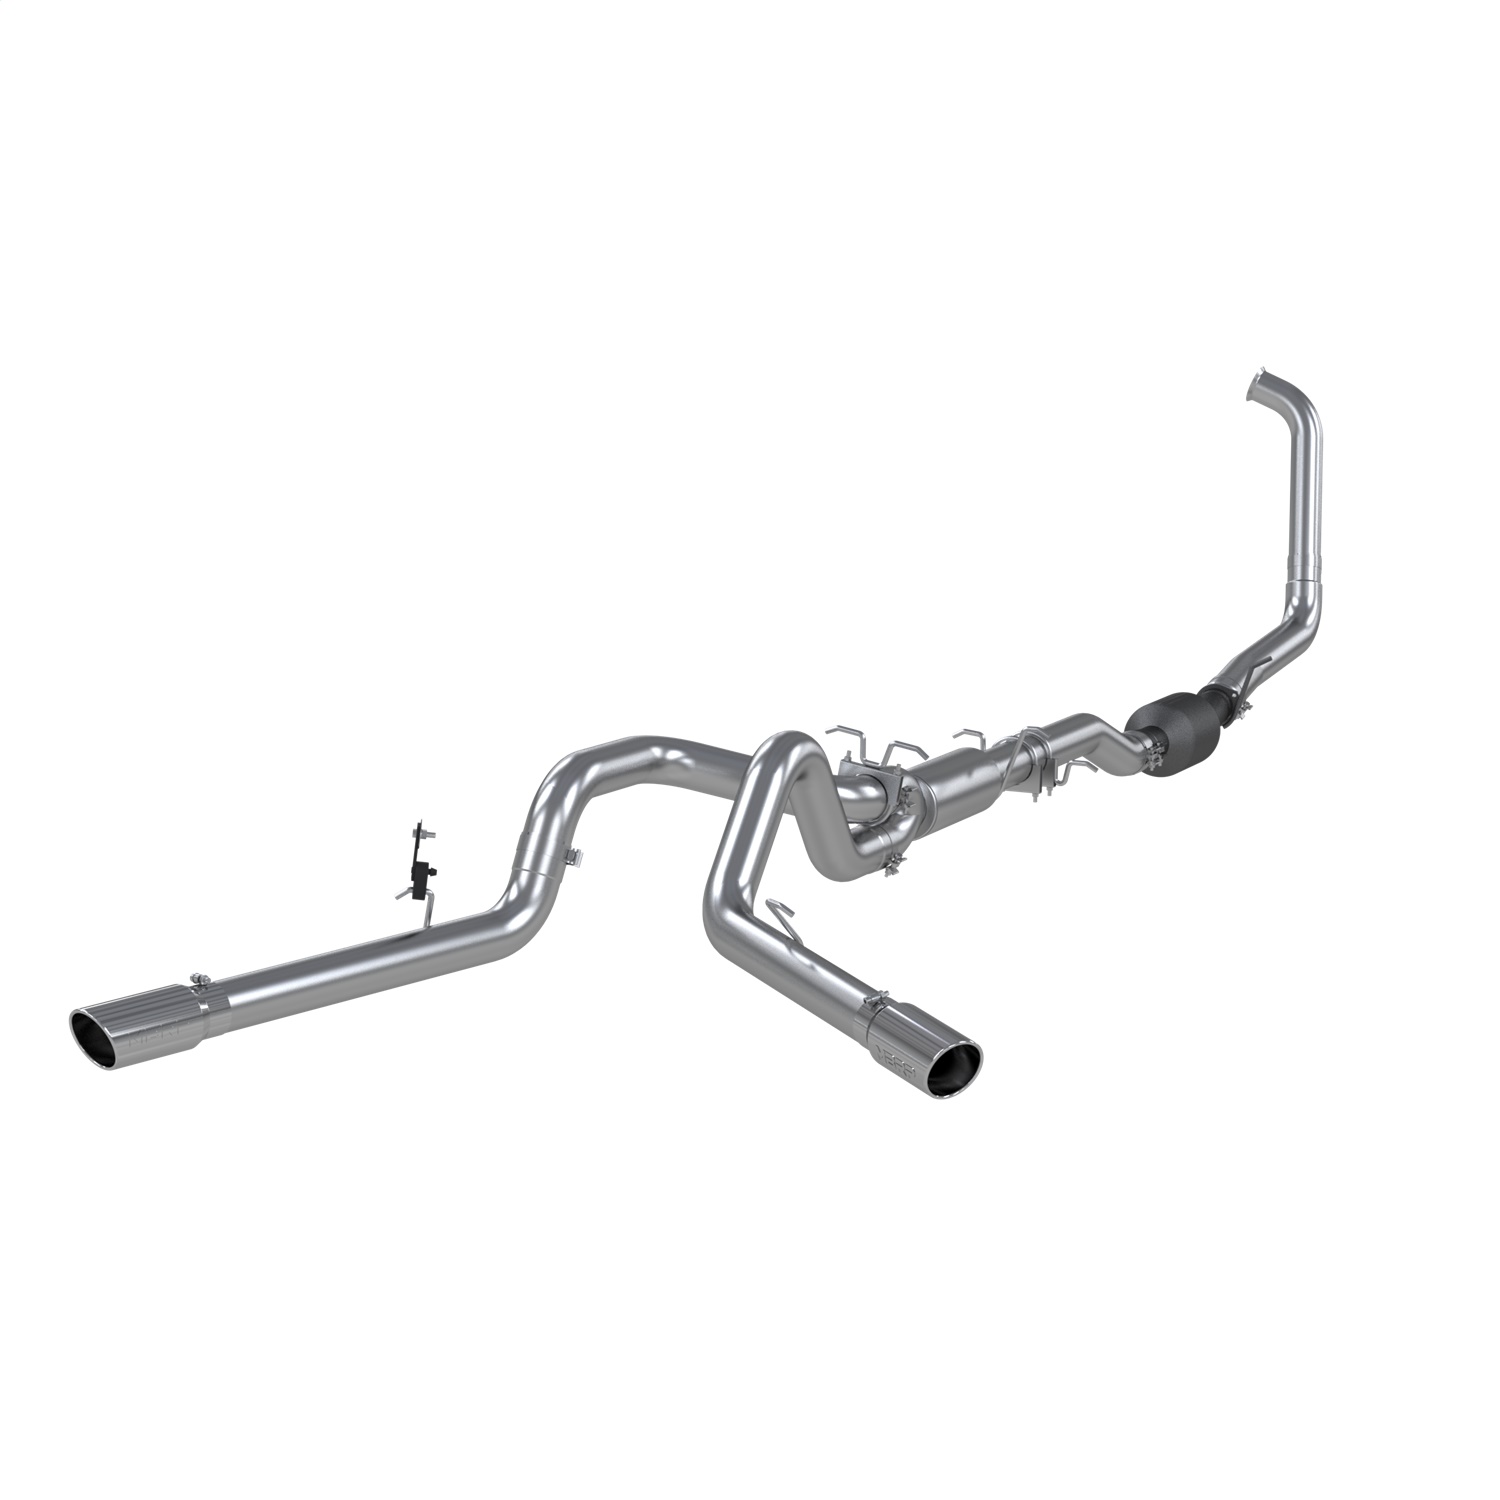 MBRP Exhaust MBRP Exhaust S6214409 XP Series Cool Duals; Turbo Back Exhaust System